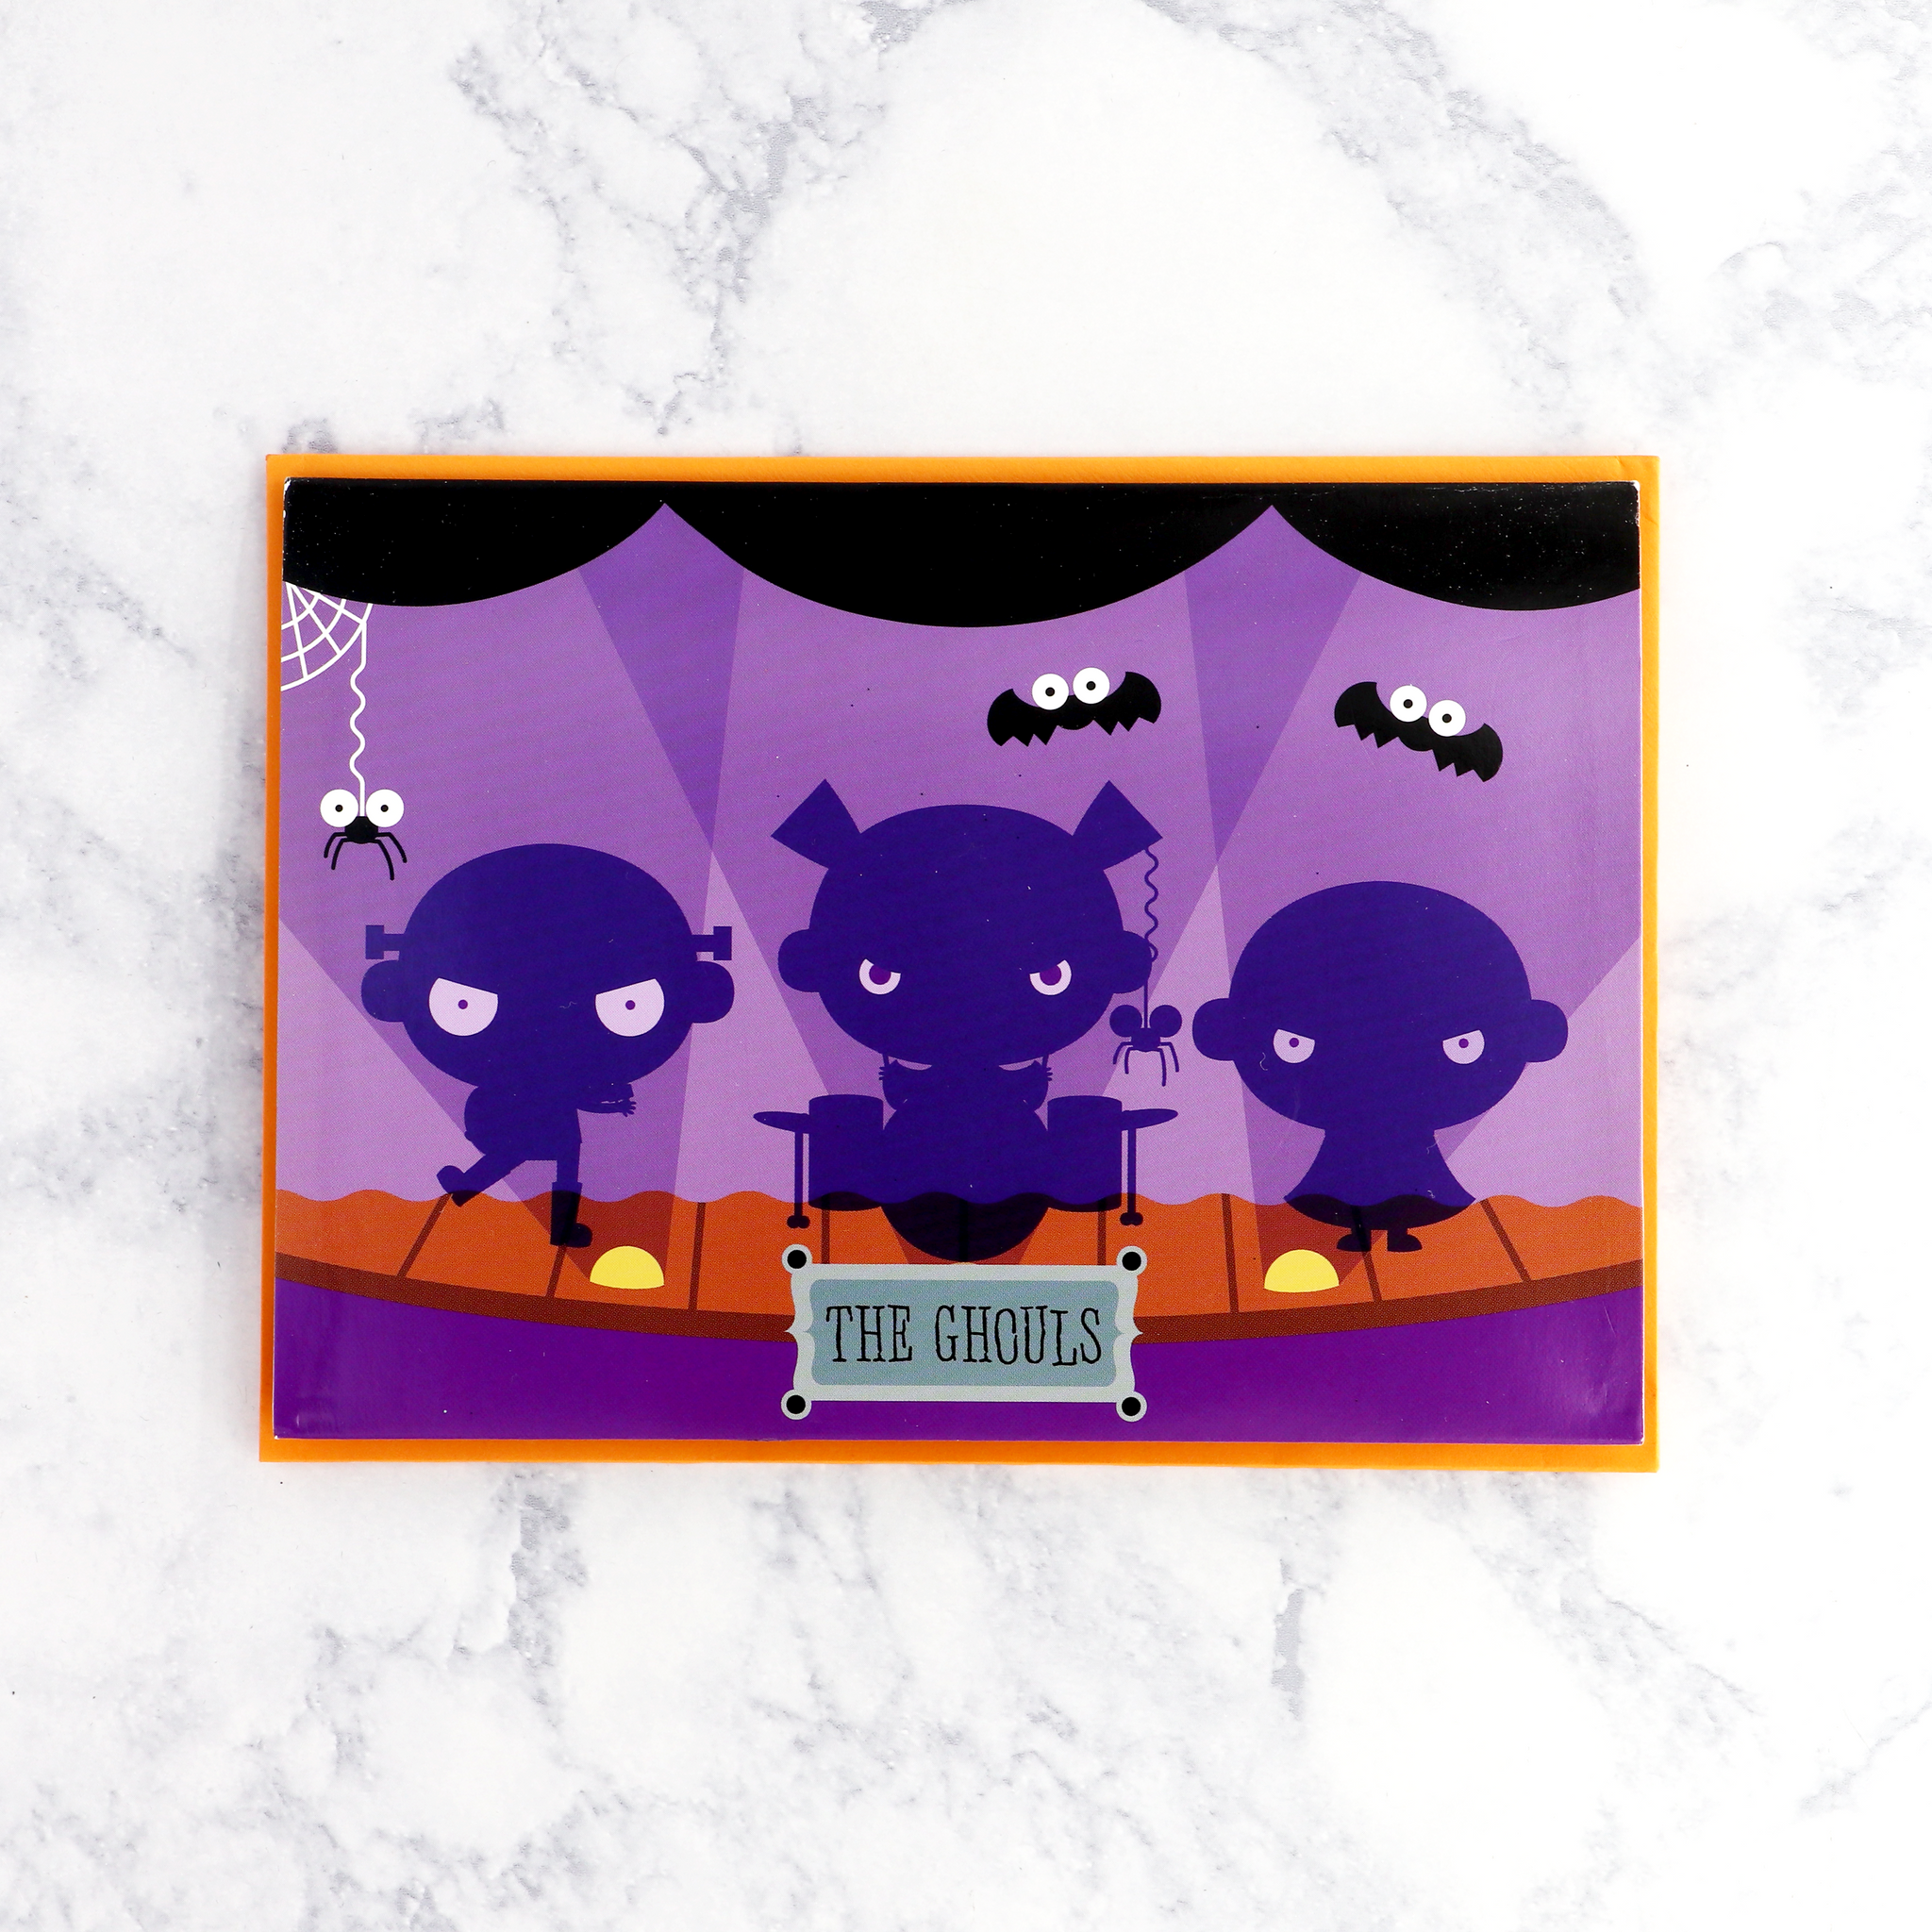 "The Ghouls" Pop-Up & Sound Halloween Card